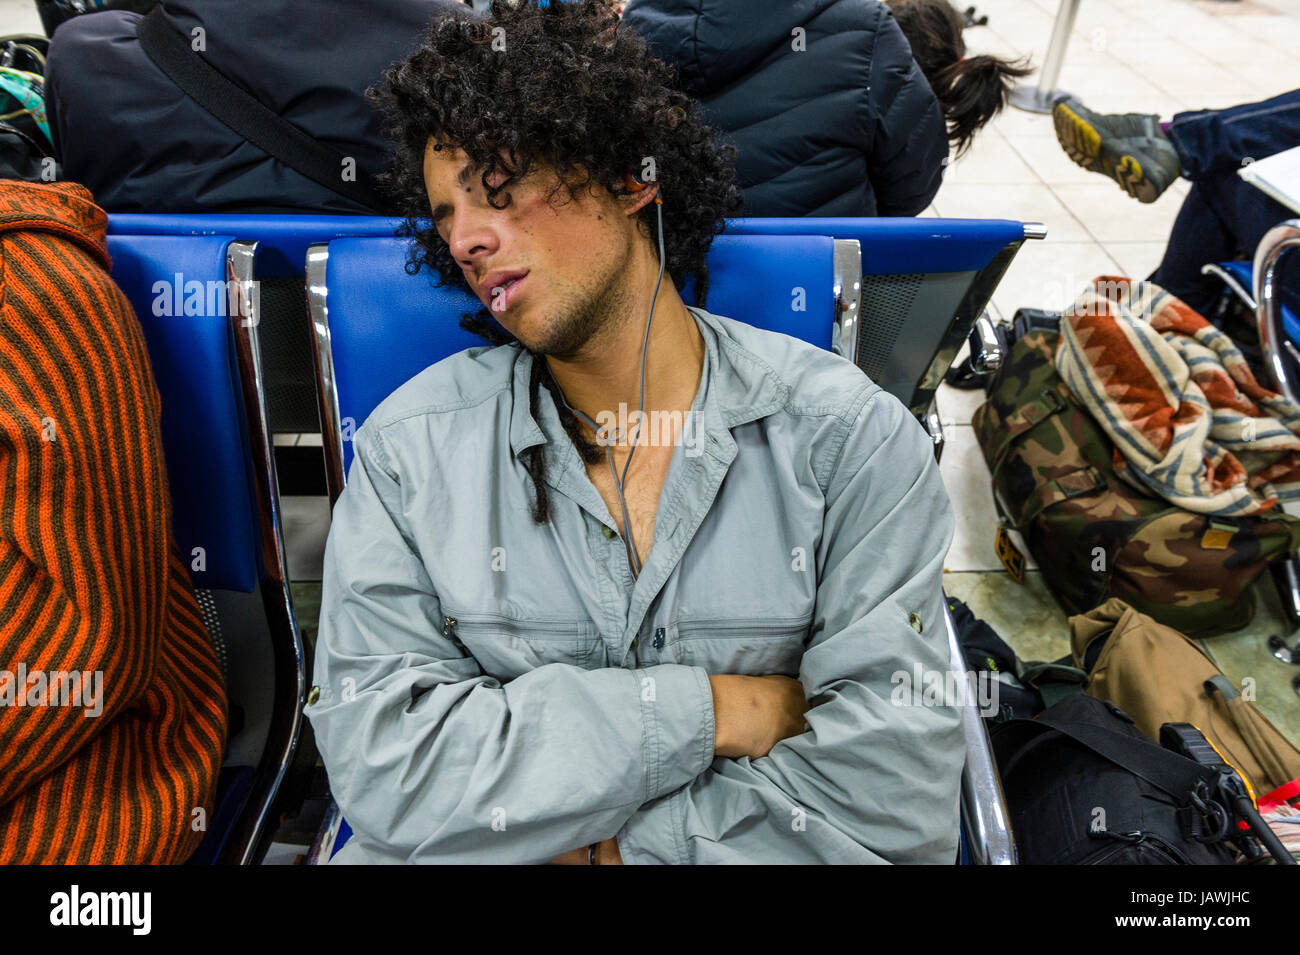 People sleeping and waiting to board planes in an airport. Stock Photo